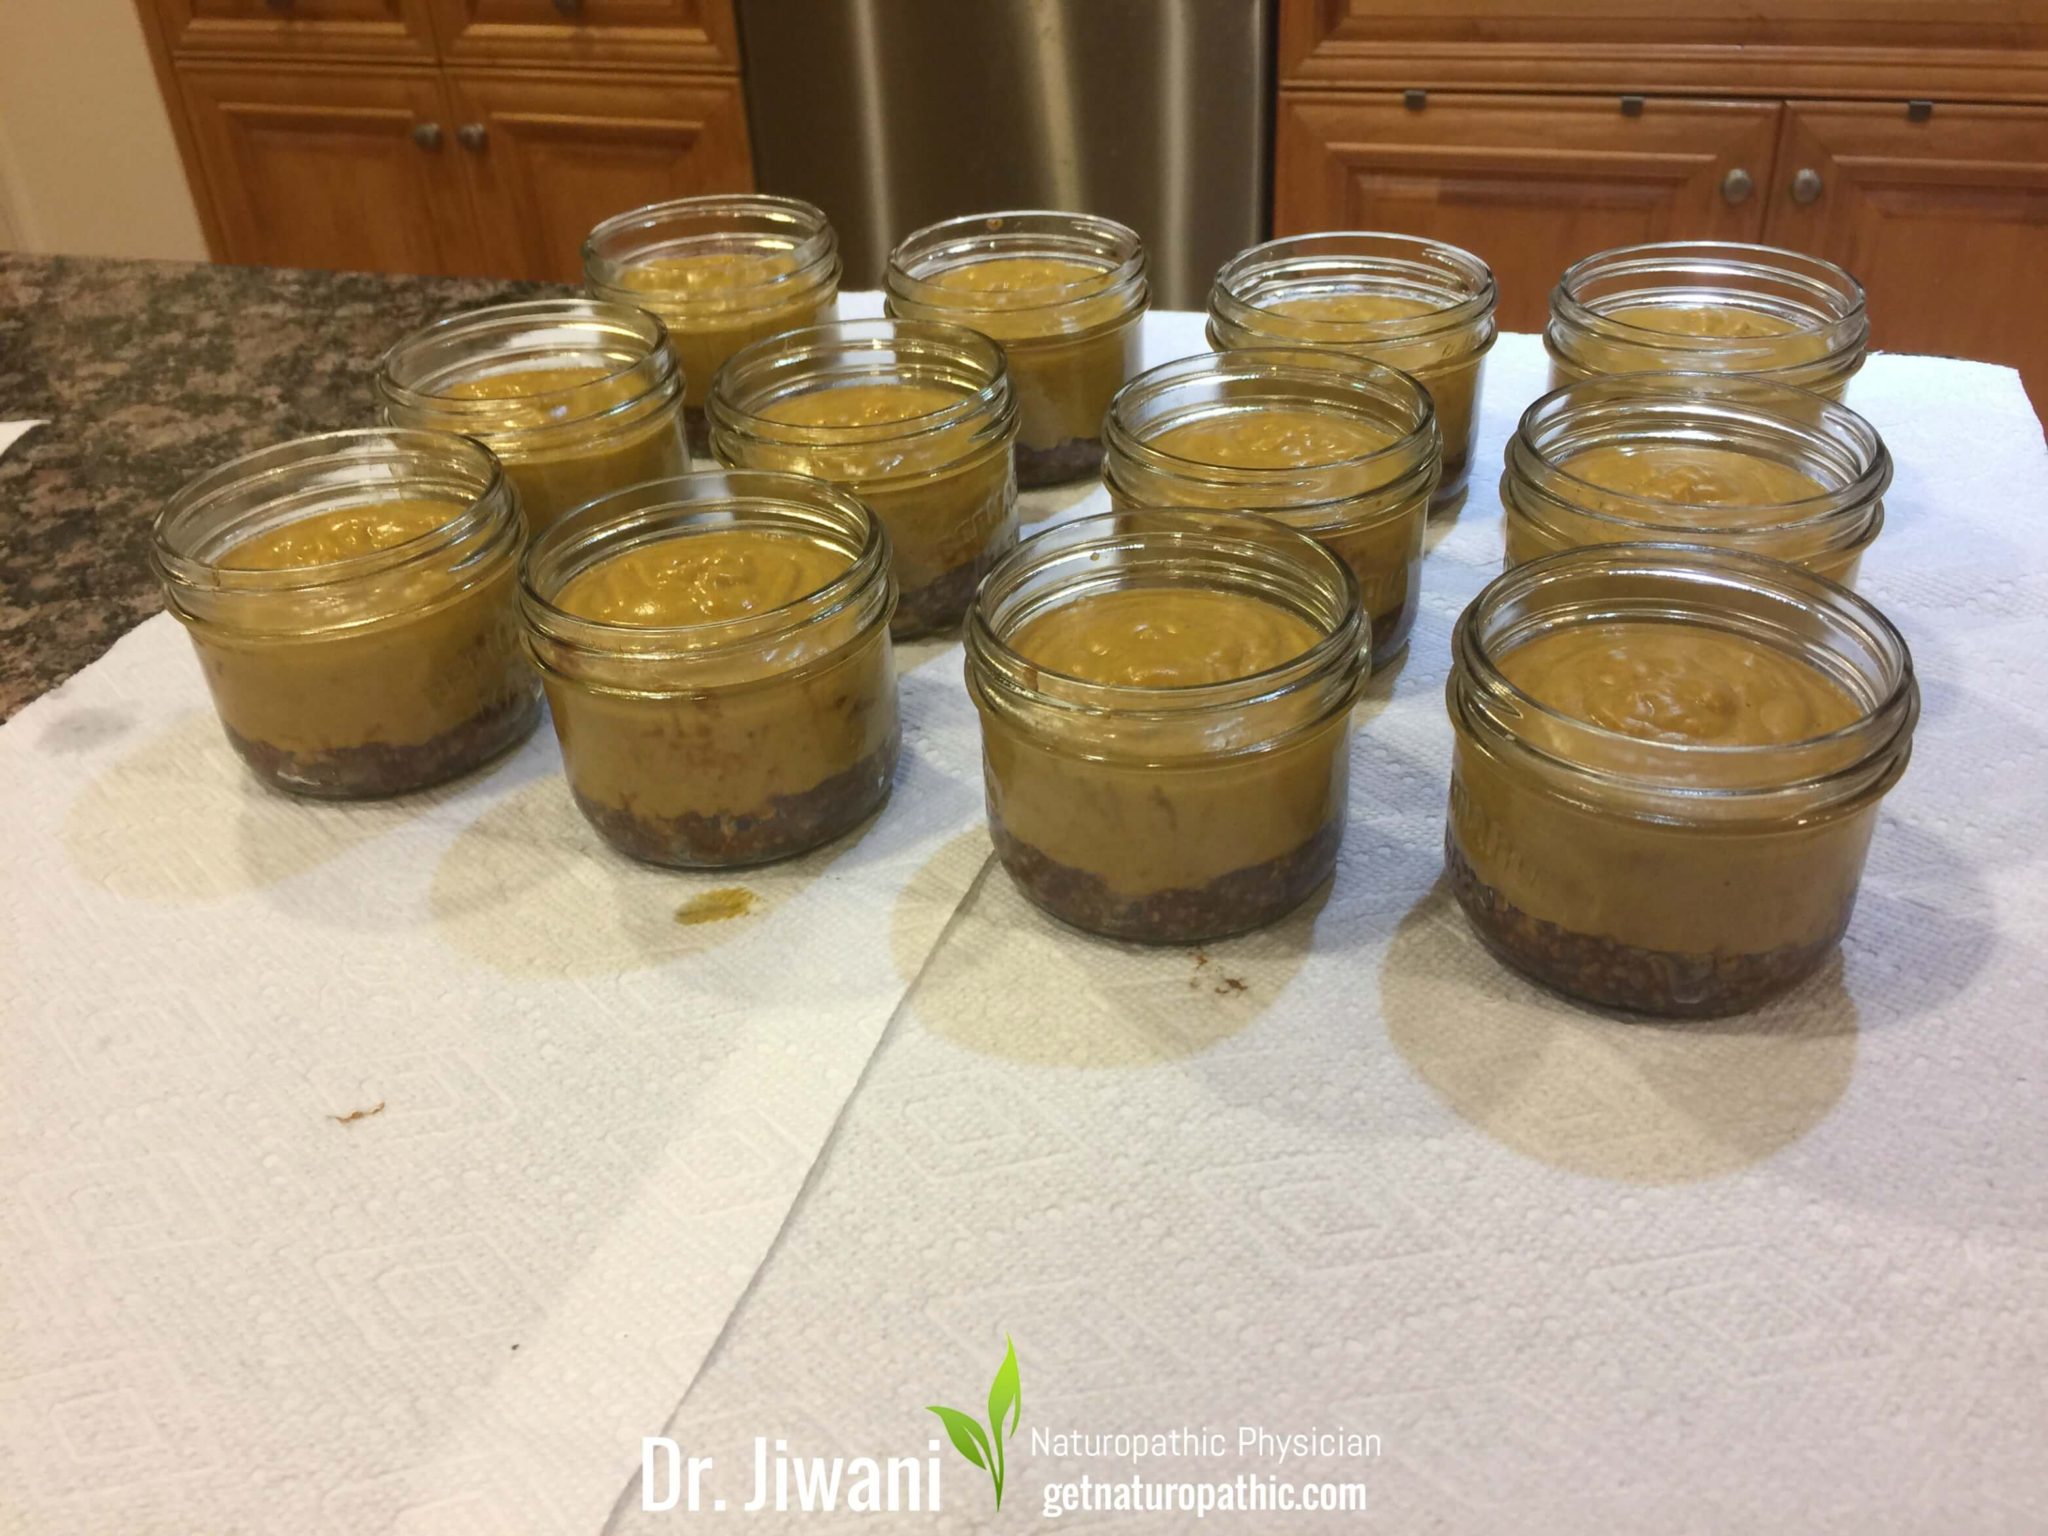 Dr. Jiwani's Pumpkin Pie Filling is Flavourful, Low Carb, Gluten-Free, Egg-Free, Dairy-Free, Soy-Free, Corn-Free, Ideal For Paleo, Keto, Vegan & Allergy-Free Diets | Dr. Jiwani's Naturopathic Nuggets Blog